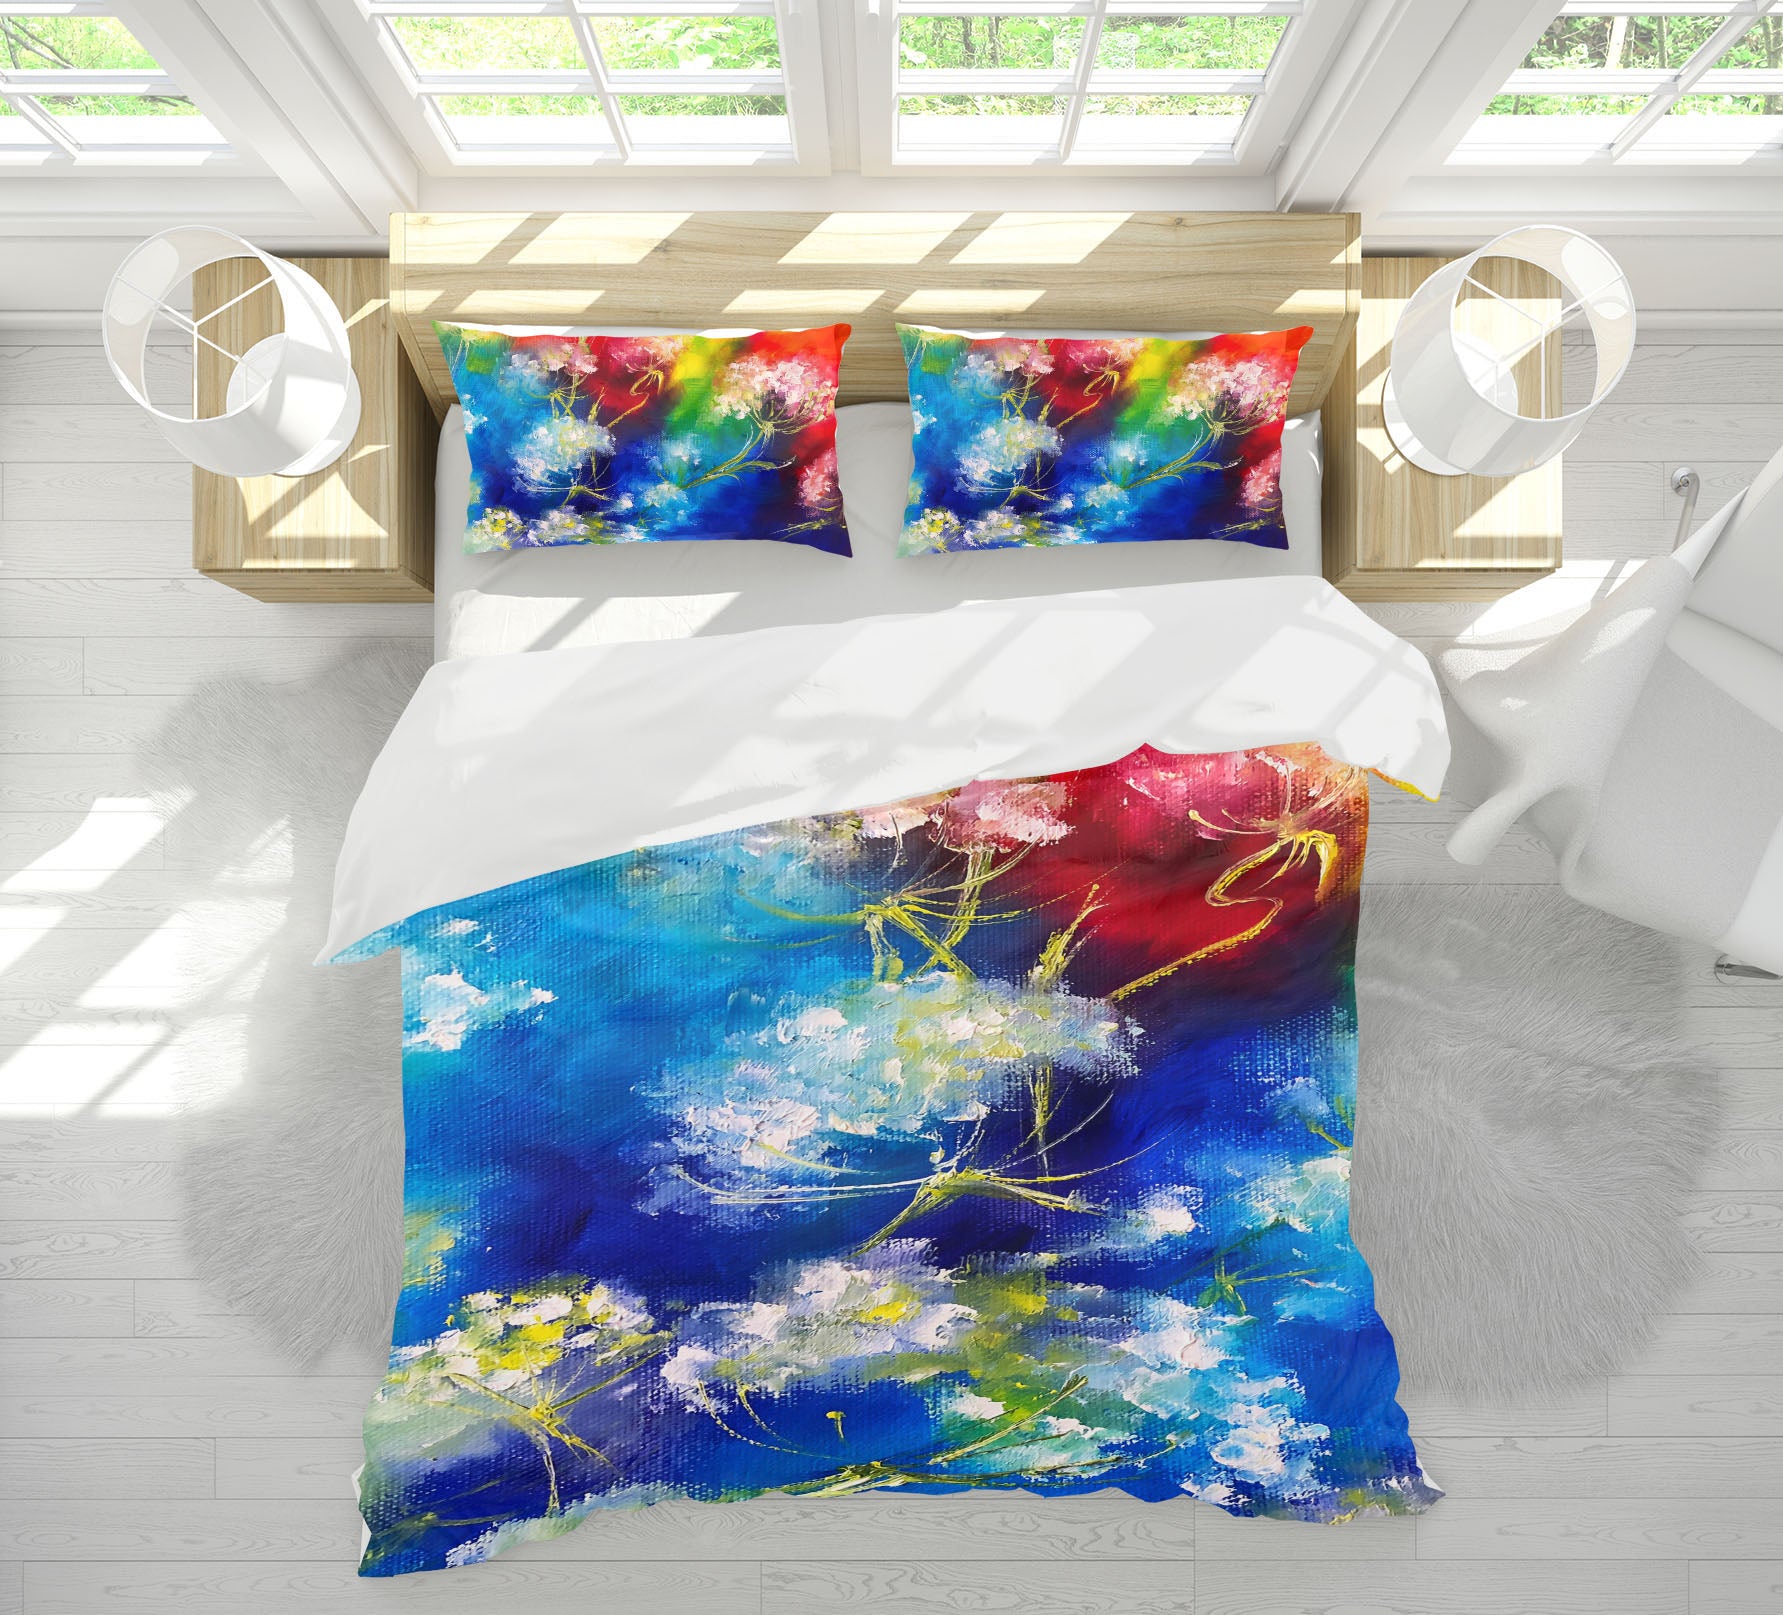 3D Painted Flowers 618 Skromova Marina Bedding Bed Pillowcases Quilt